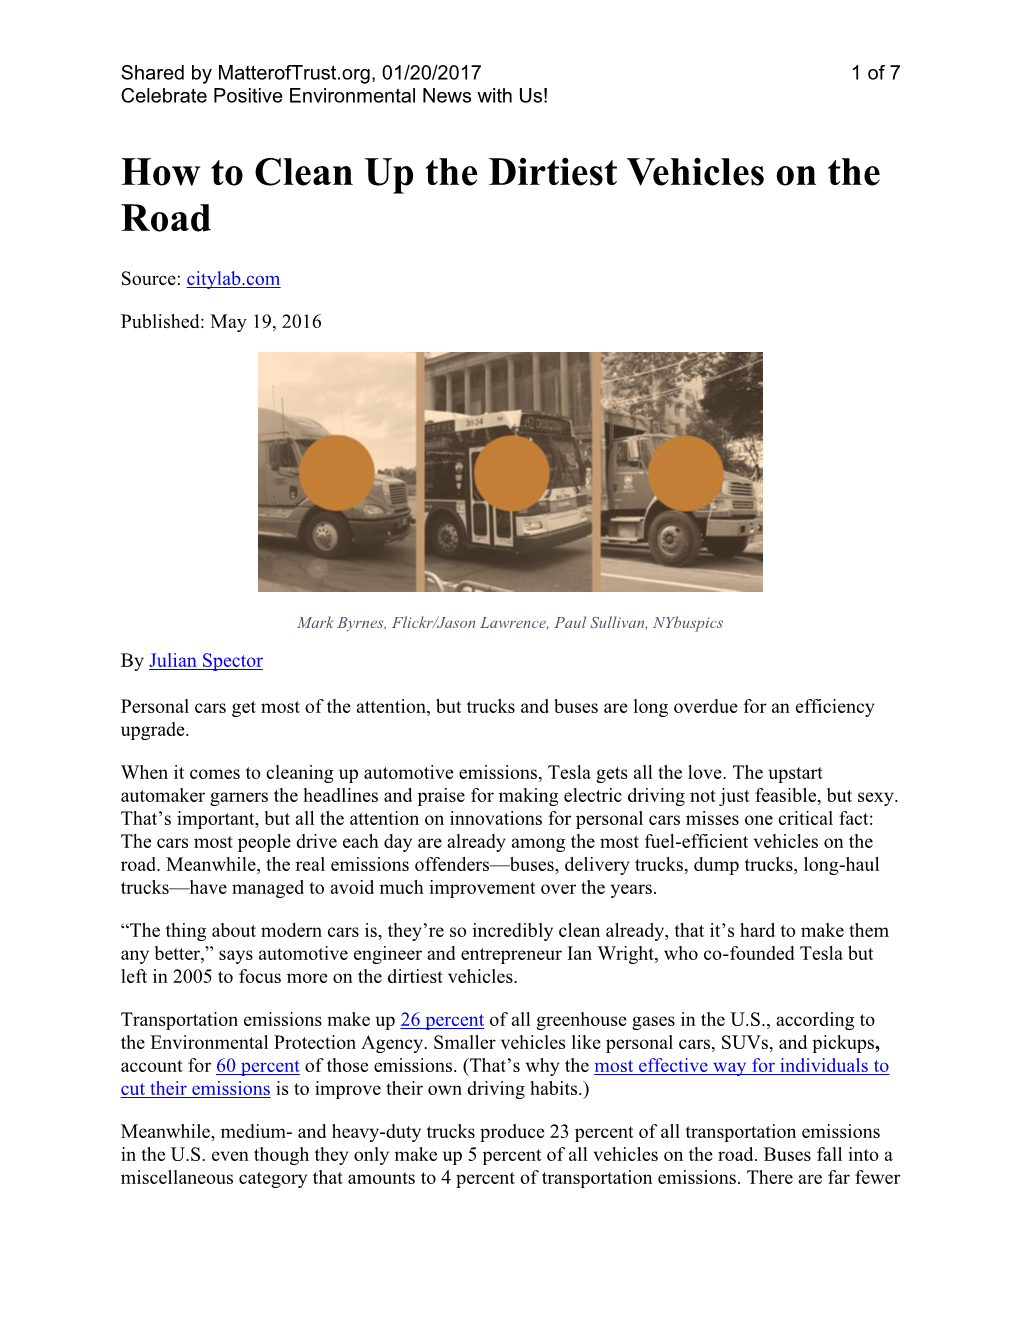 20170120-How-To-Clean-Up-The-Dirtiest-Vehicles-On-The-Road